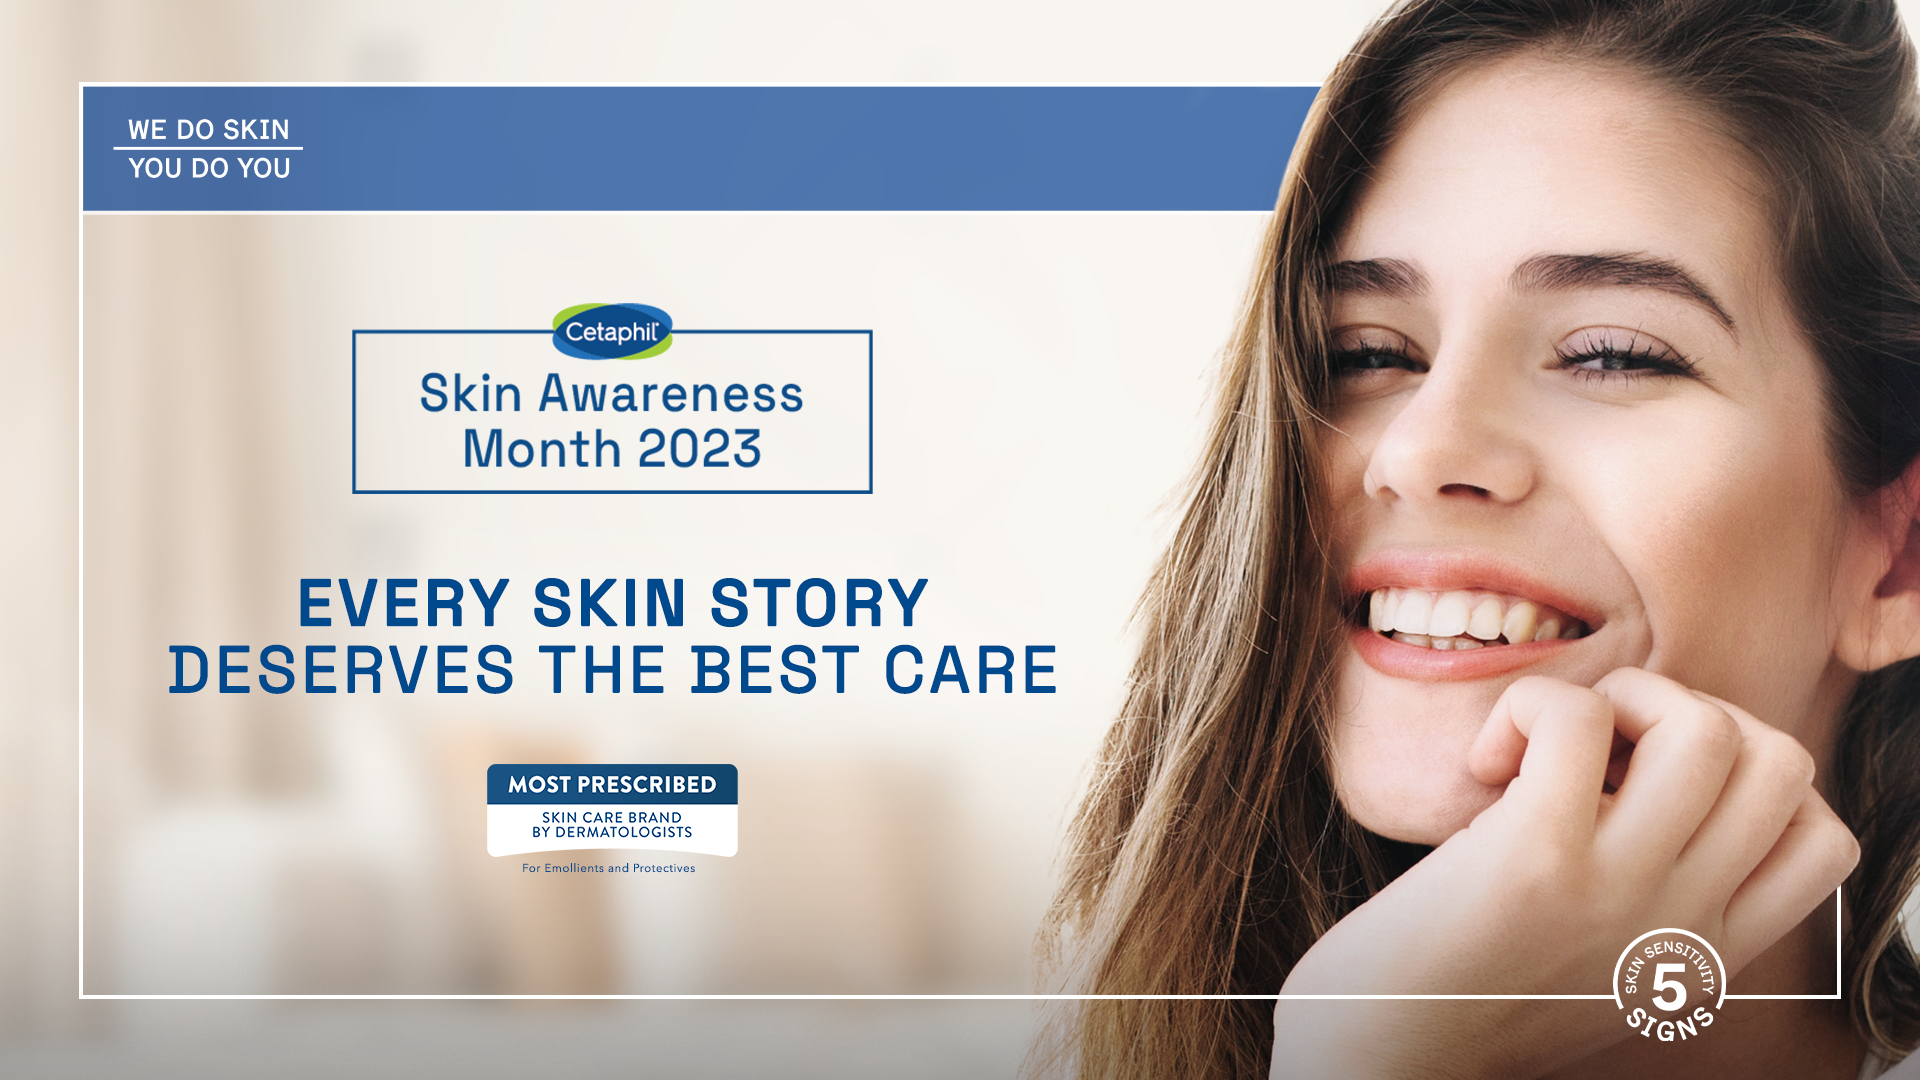 Cetaphil’s skin awareness global campaign returns for its second year